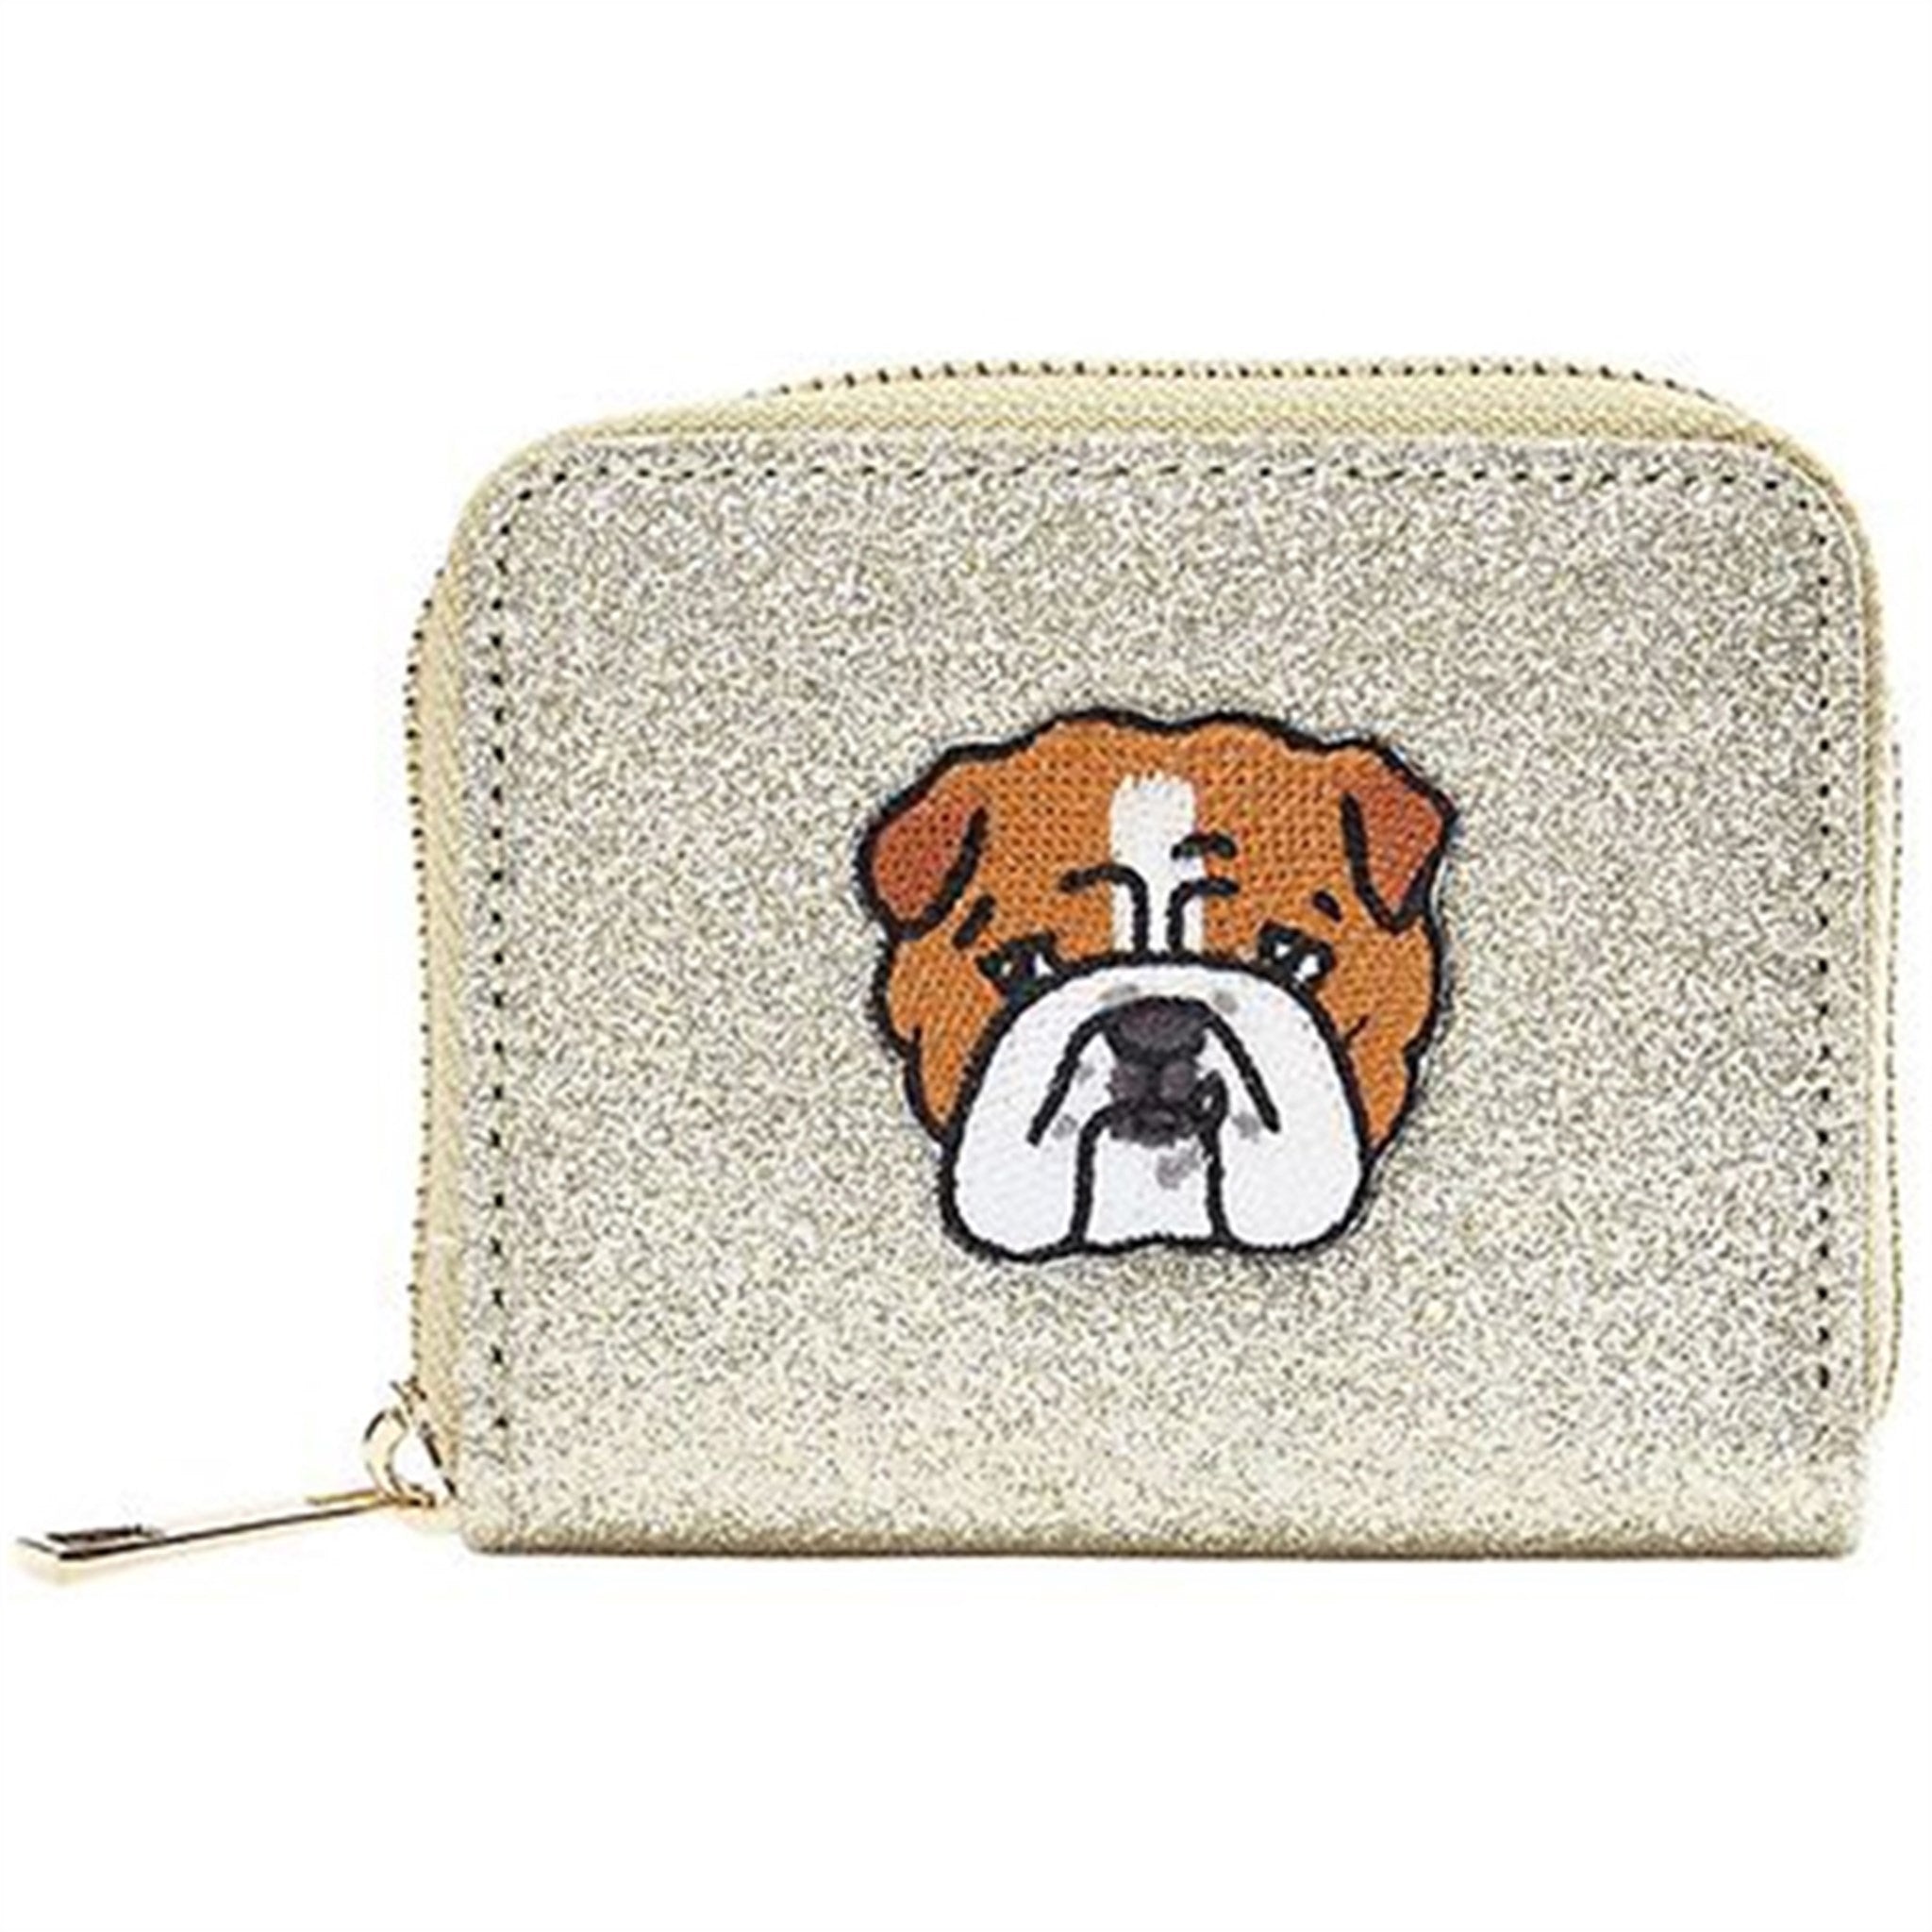 Sofie Schnoor Young Wallet Champagne